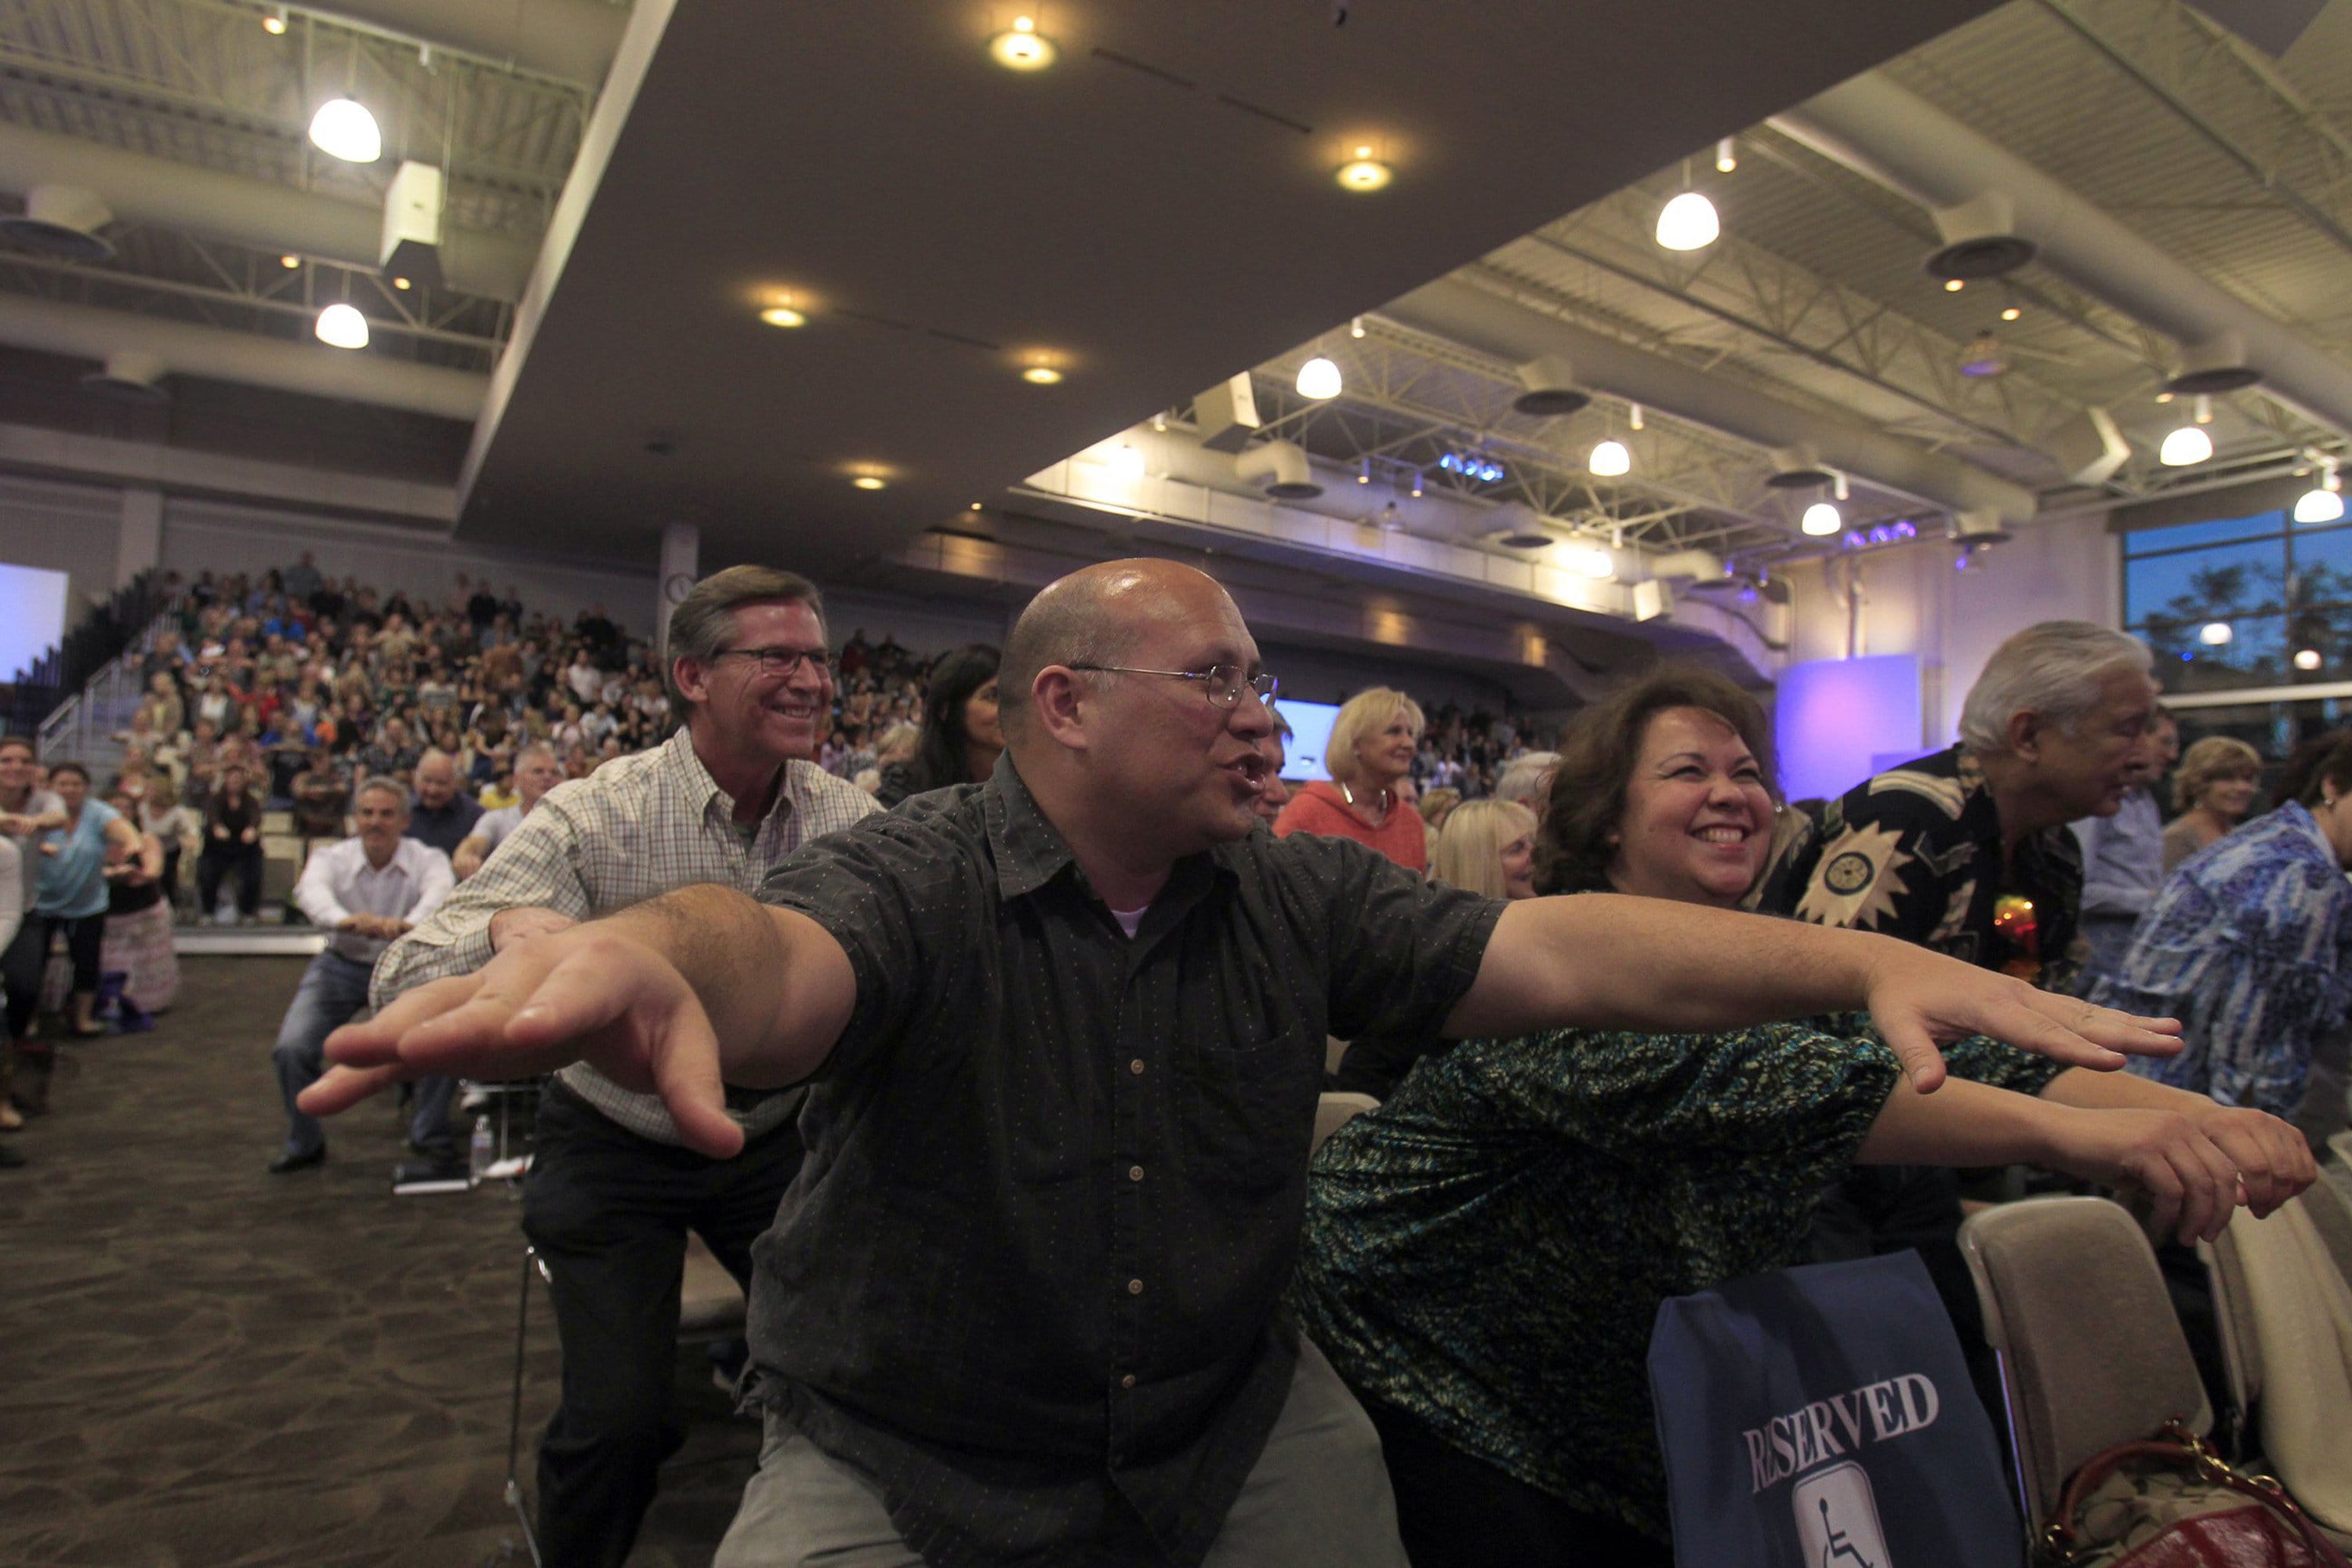 Congregation members exercise in their seats during a rally for pastor Rick Warrenu2019s u201cDaniel Planu201d at Saddleback Church in Lake Forest, Calif.